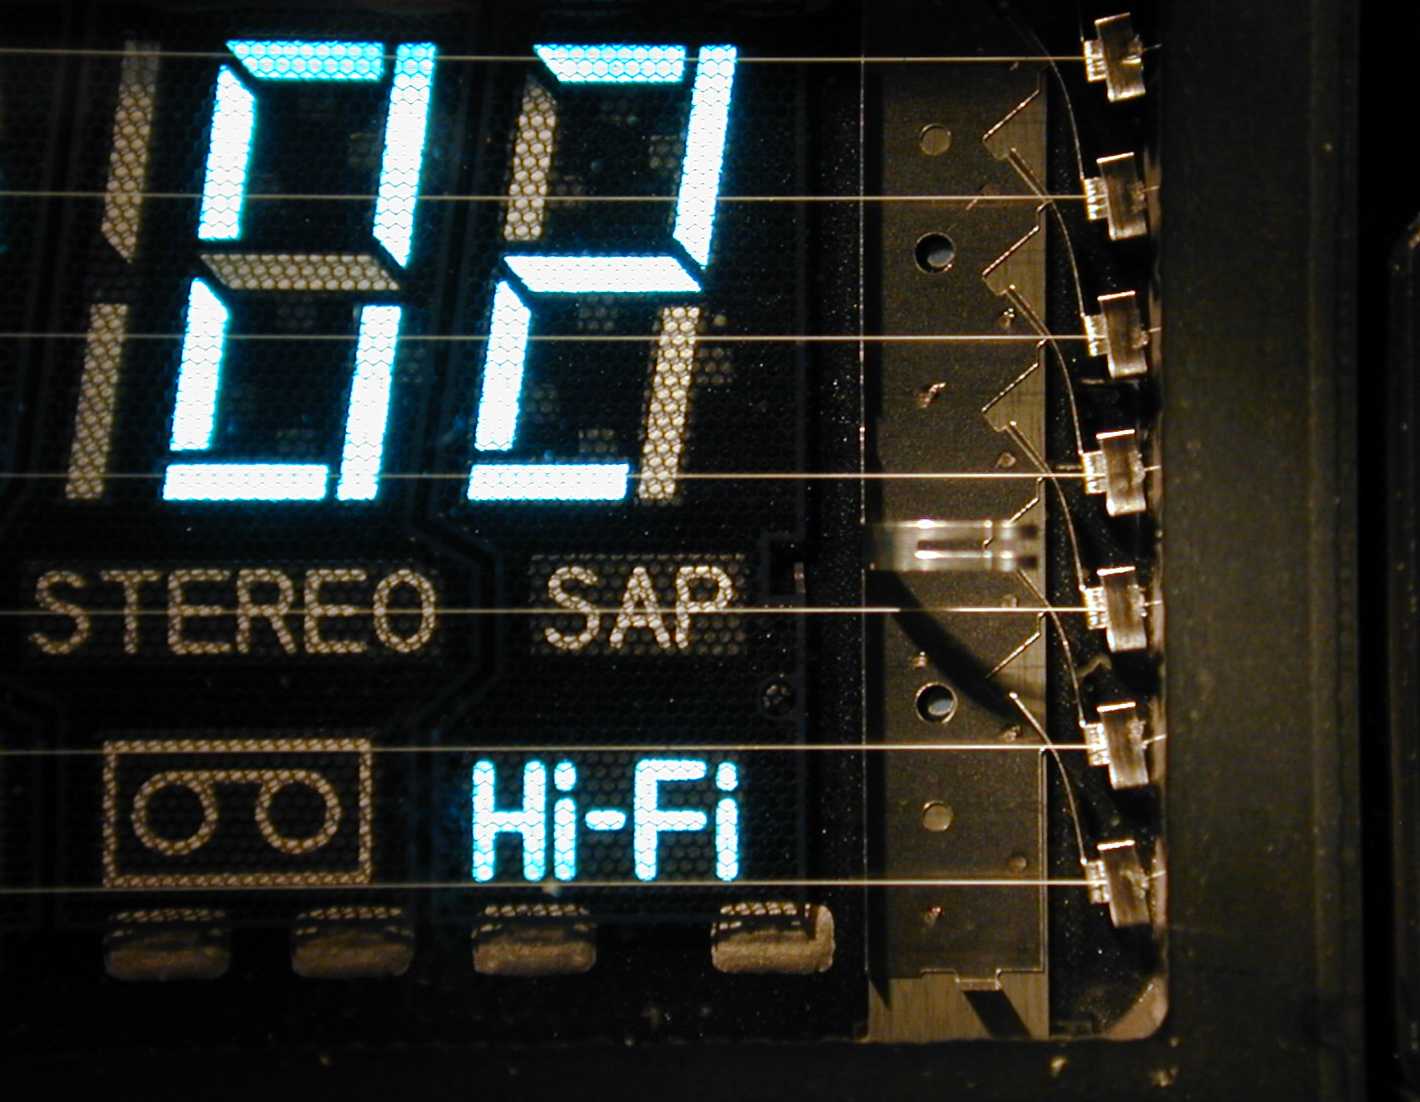 Example of a VFD in a Hi-Fi Sterio System